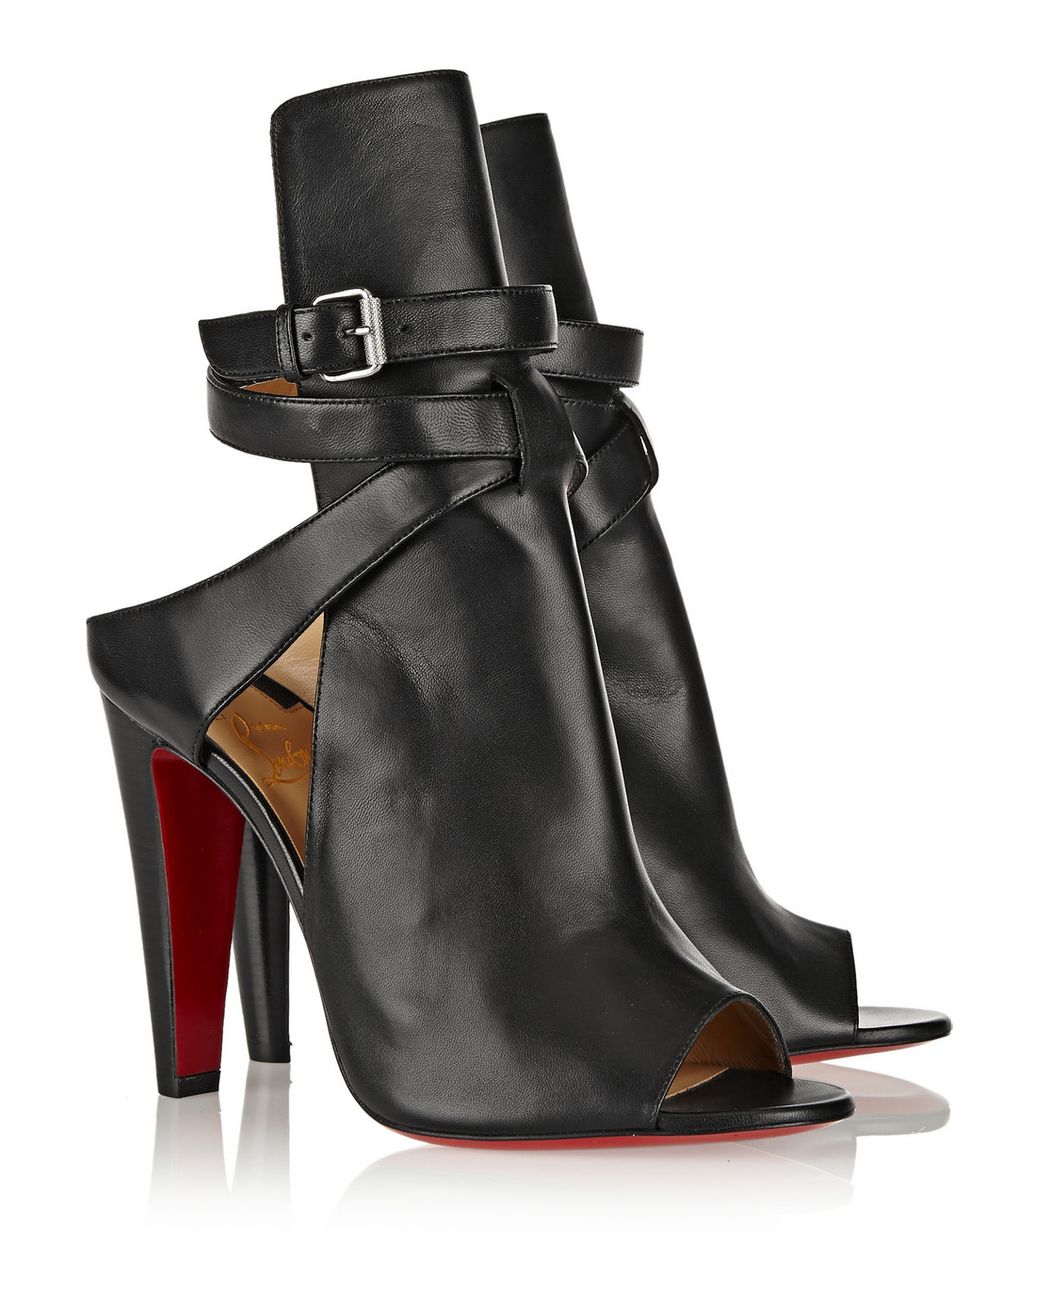 Christian Louboutin Hippik 100 Cutout Leather Ankle Boots in Black